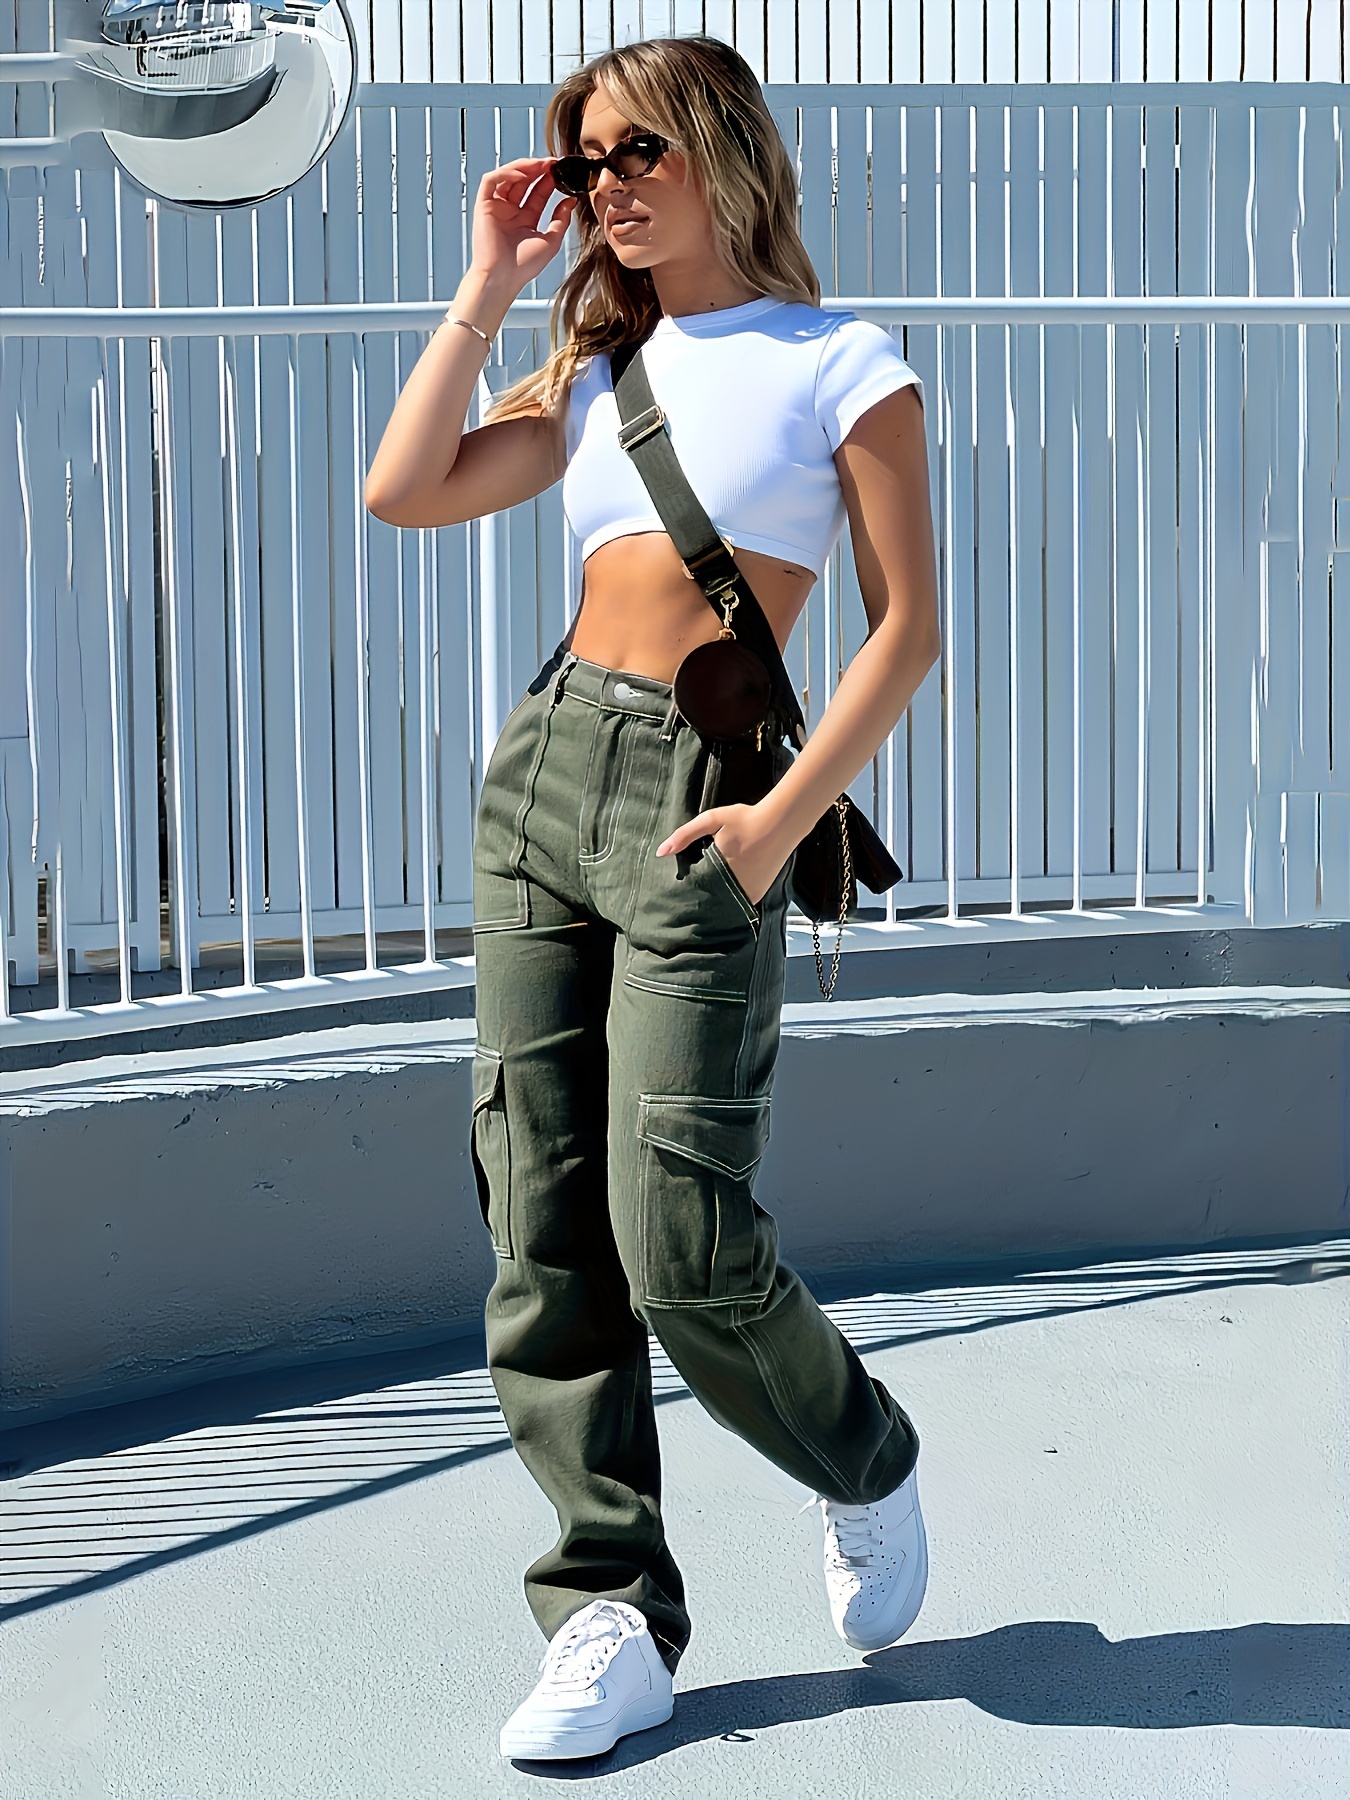 Army Green Cargo Pants, Flap Pockets High Waist Loose Fit Non-Stretch  Casual Denim Pants, Y2K Kpop Vintage Style, Women's Denim Jeans & Clothing